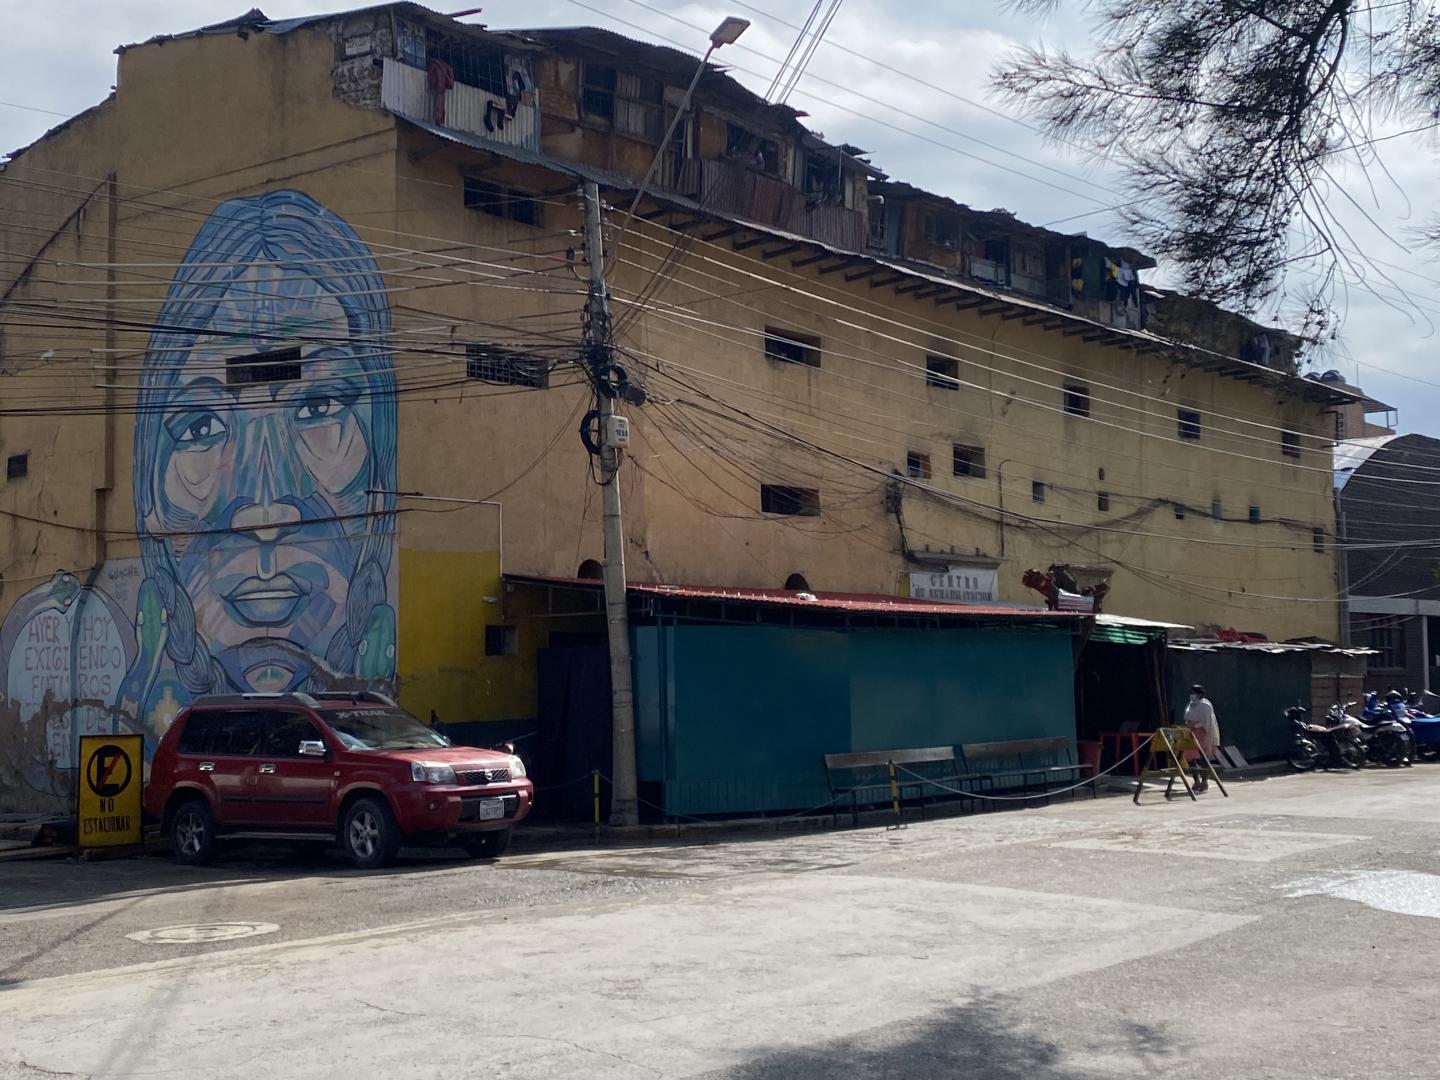 A prison building in Bolivia. There is a mural of a large face on the side of the building